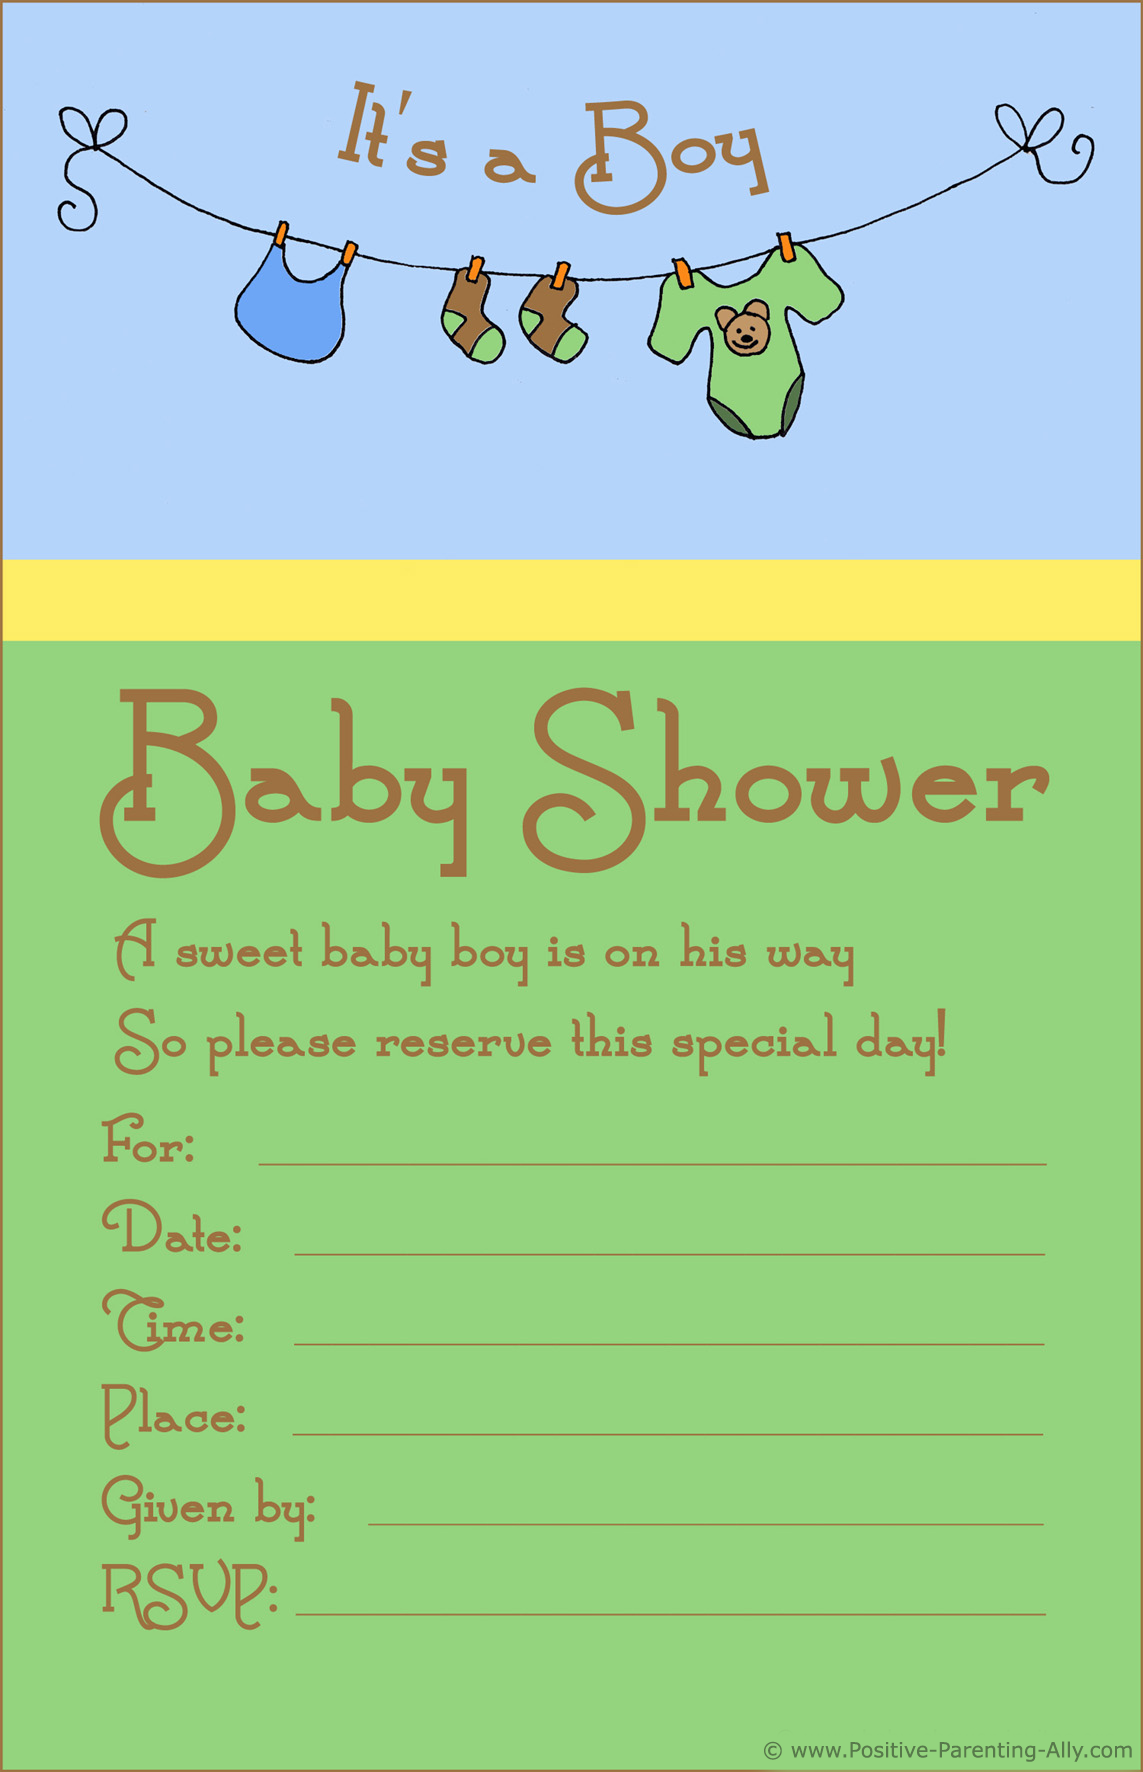 Baby shower invitation template for boys with a clothesline with baby clothes.